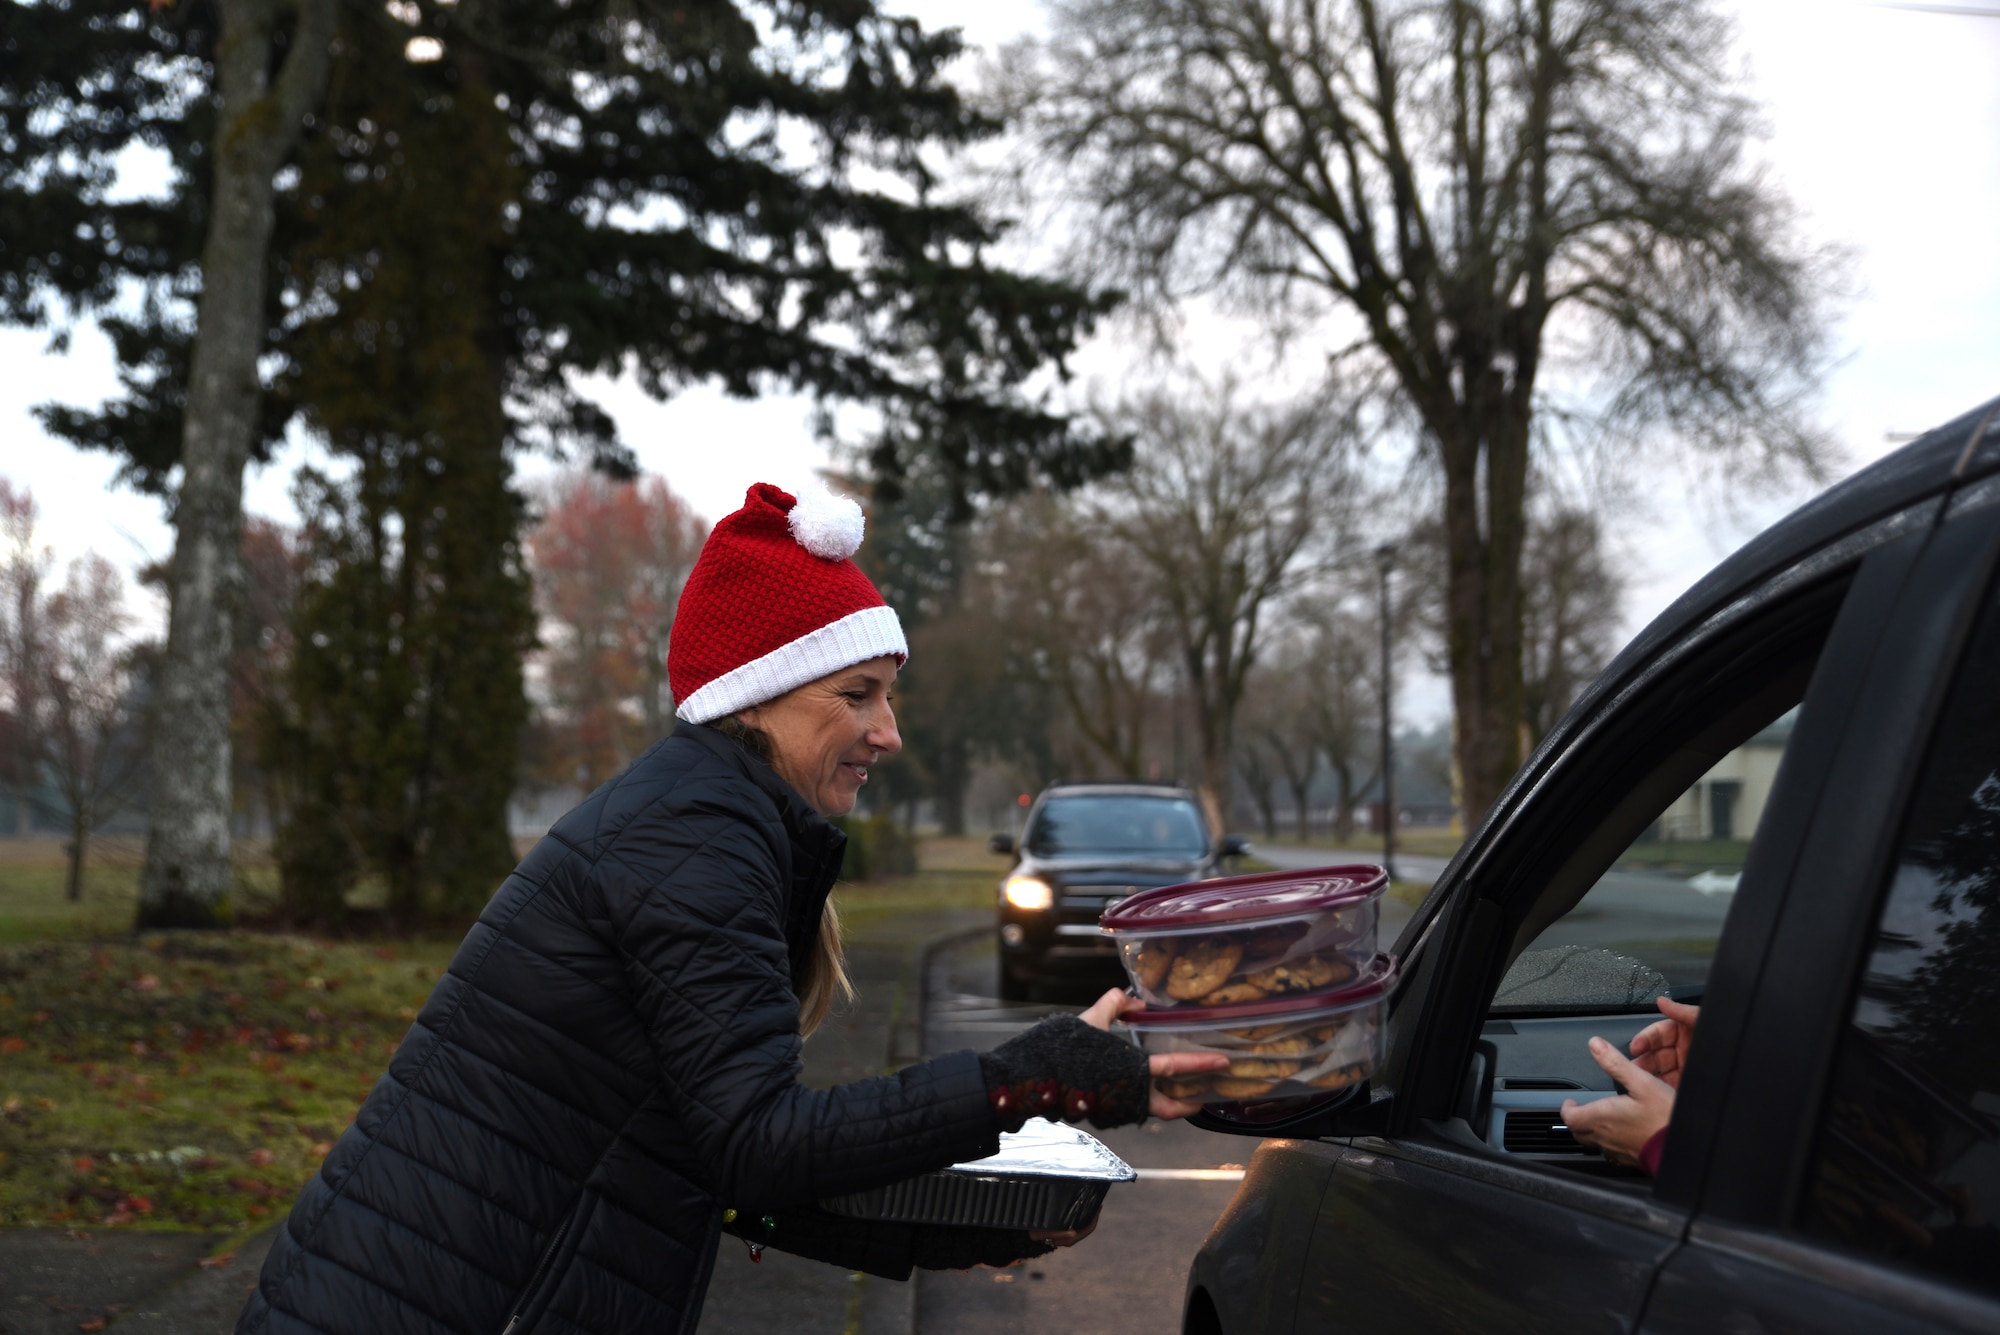 A Team McChord volunteer receives a batch of cookies from a donor for Operation Cookie Drop at Joint Base Lewis-McChord, Washington, Dec. 14, 2022. Operation Cookie Drop is an Air Force tradition that supports single Airmen who are far from home during the holidays. (U.S. Air Force photo by Airman Kylee Tyus)